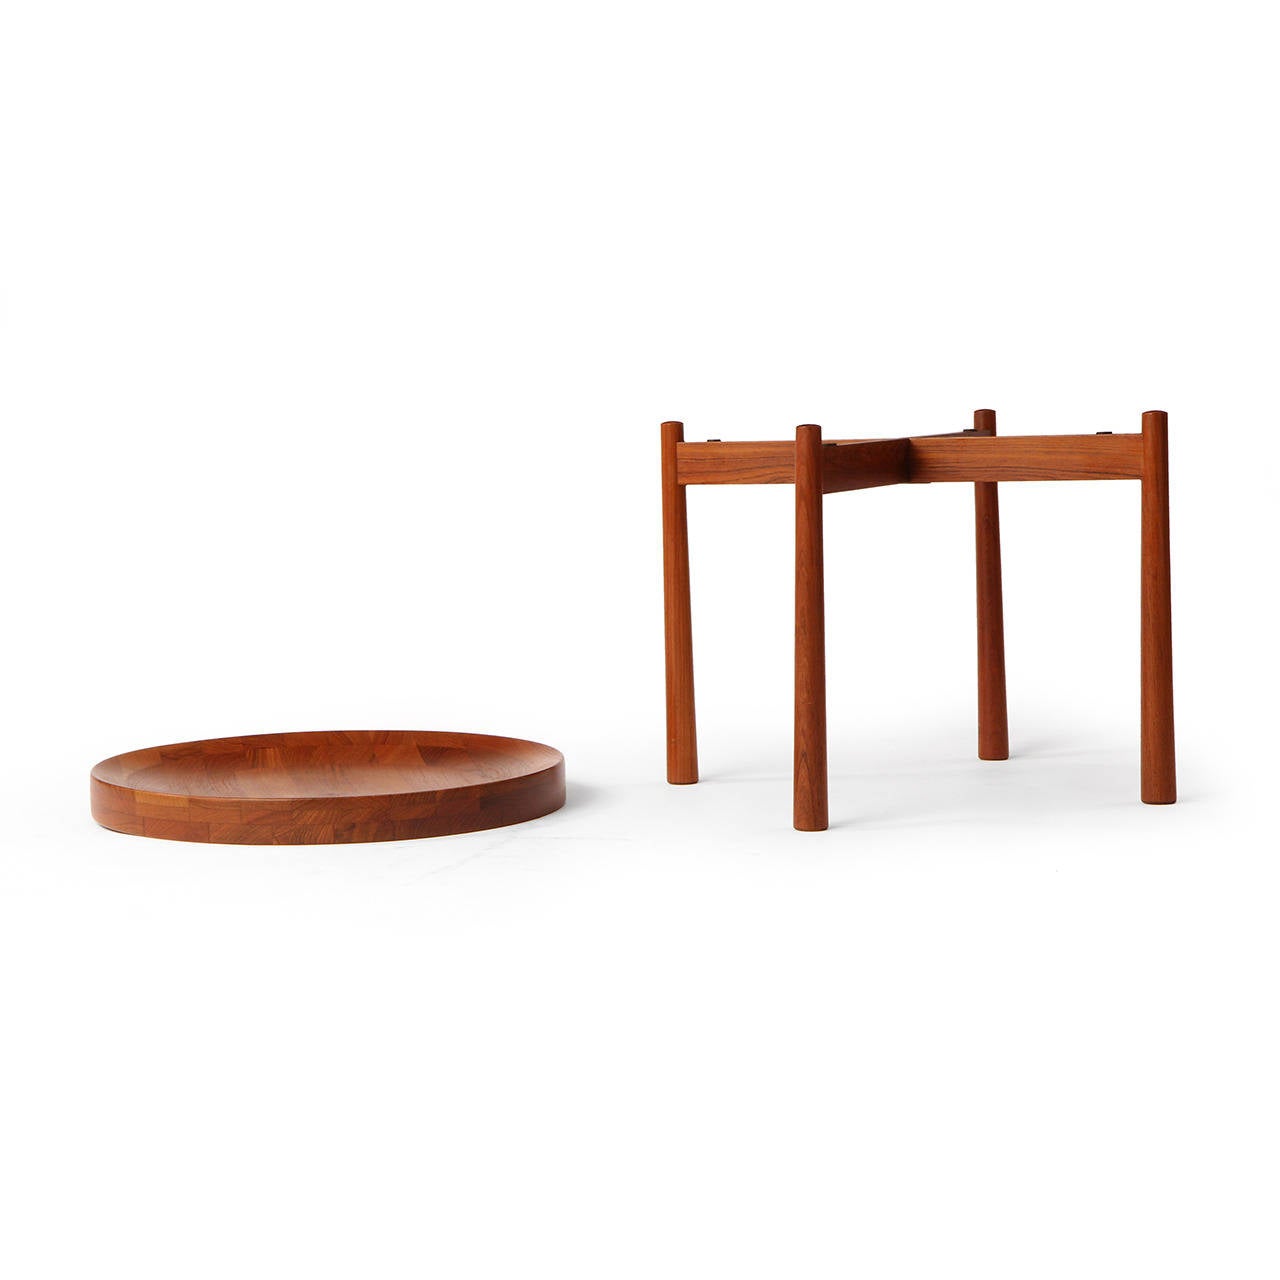 1960s Danish Modern Tray Table by Jens Quistgaard for Richard Nissen In Excellent Condition For Sale In Sagaponack, NY